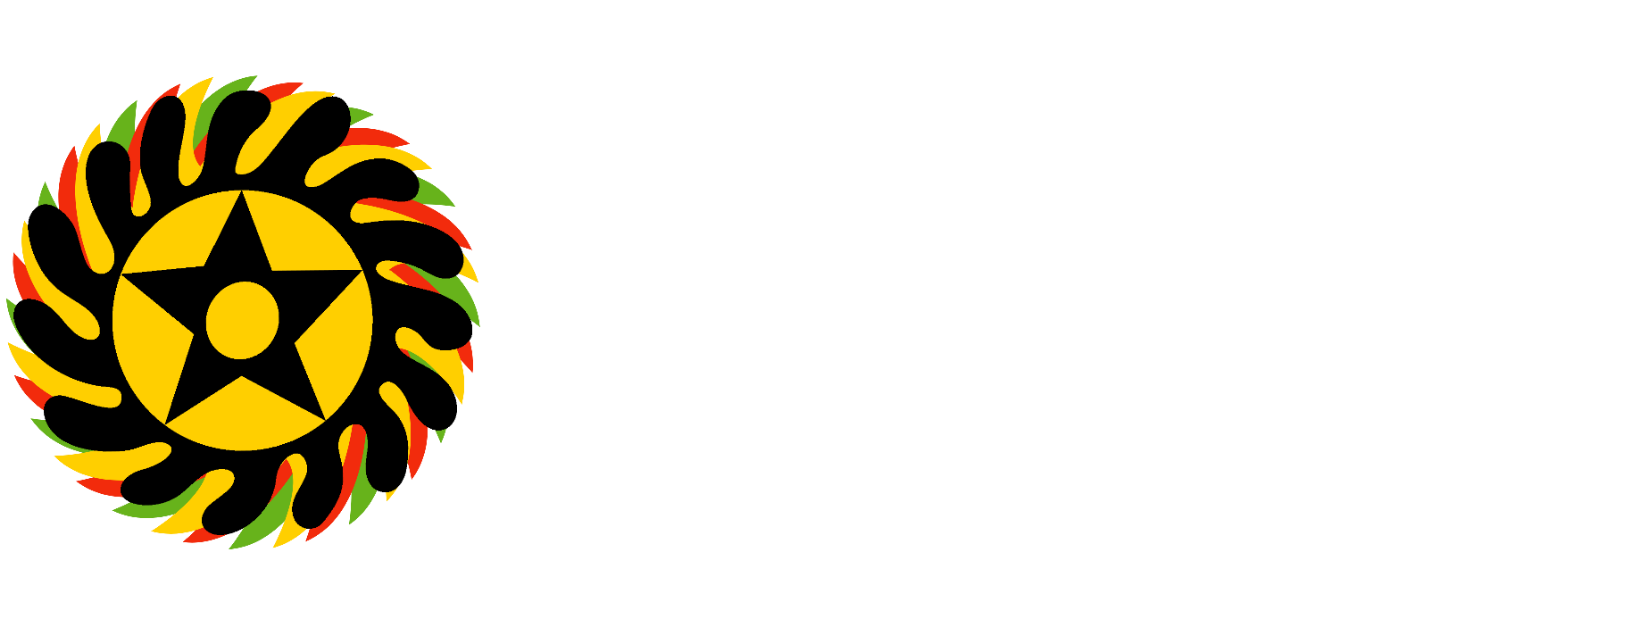 The is the Logo of the Delta Star Digital Marketing comapny